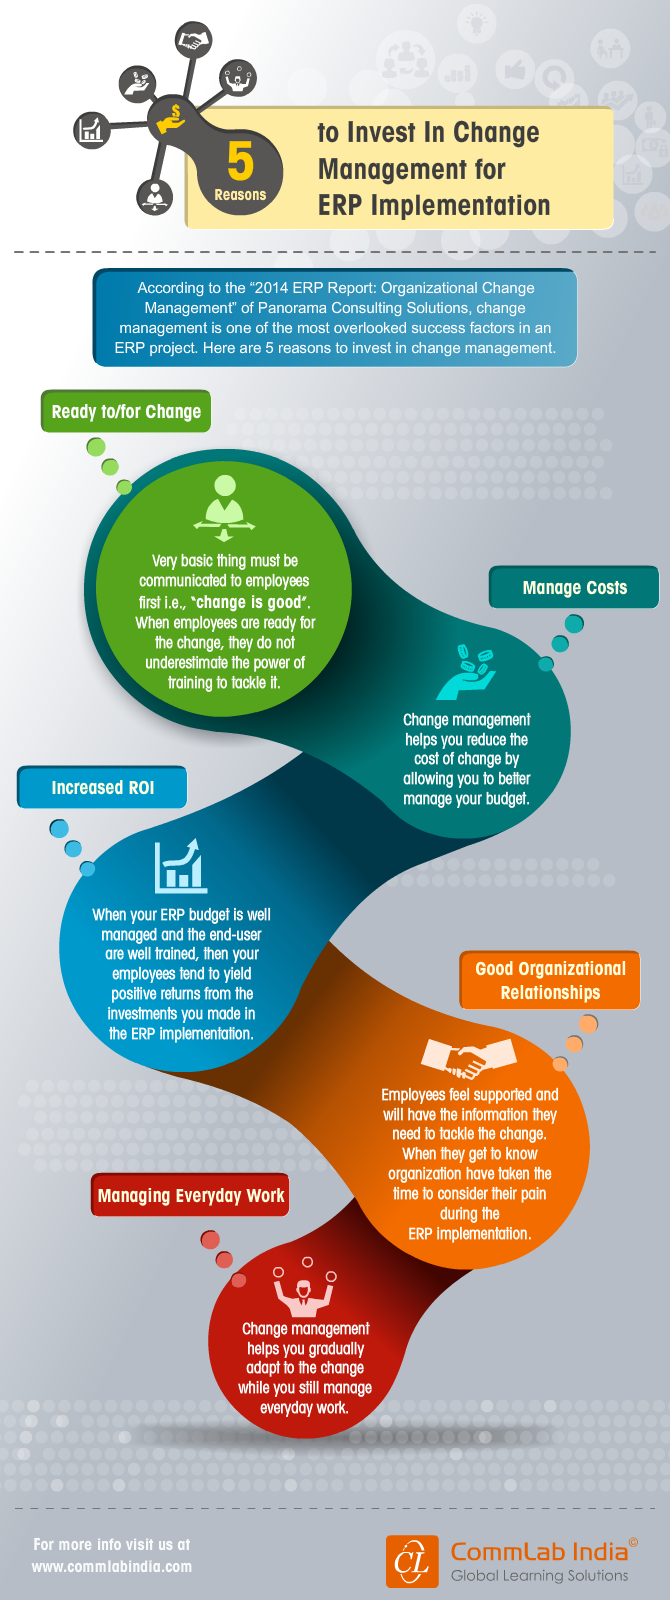 5 Reasons To Invest In Change Management For ERP Implementation [Infographic]